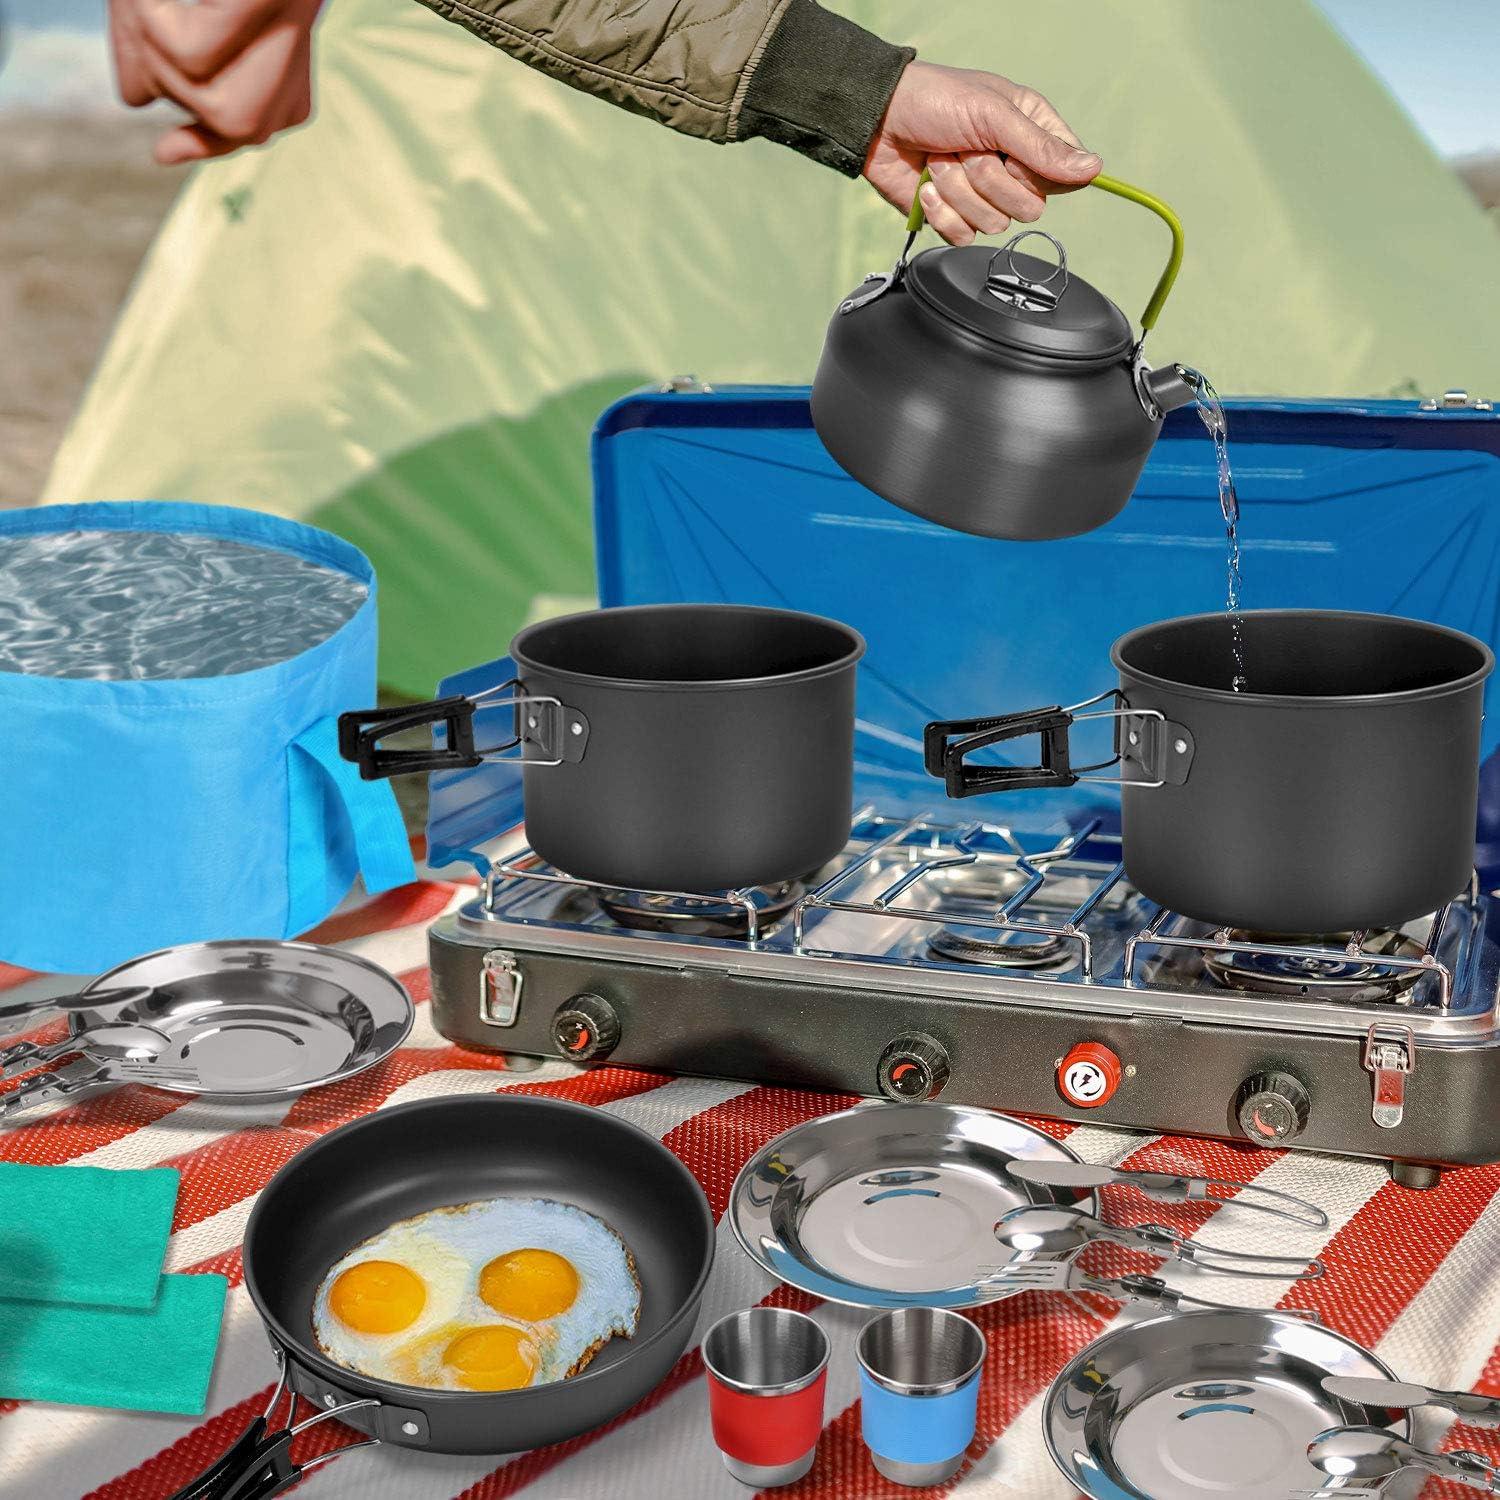 NEW! Camping Cookware Set 304 Stainless Steel 8-Piece Pots & Pans